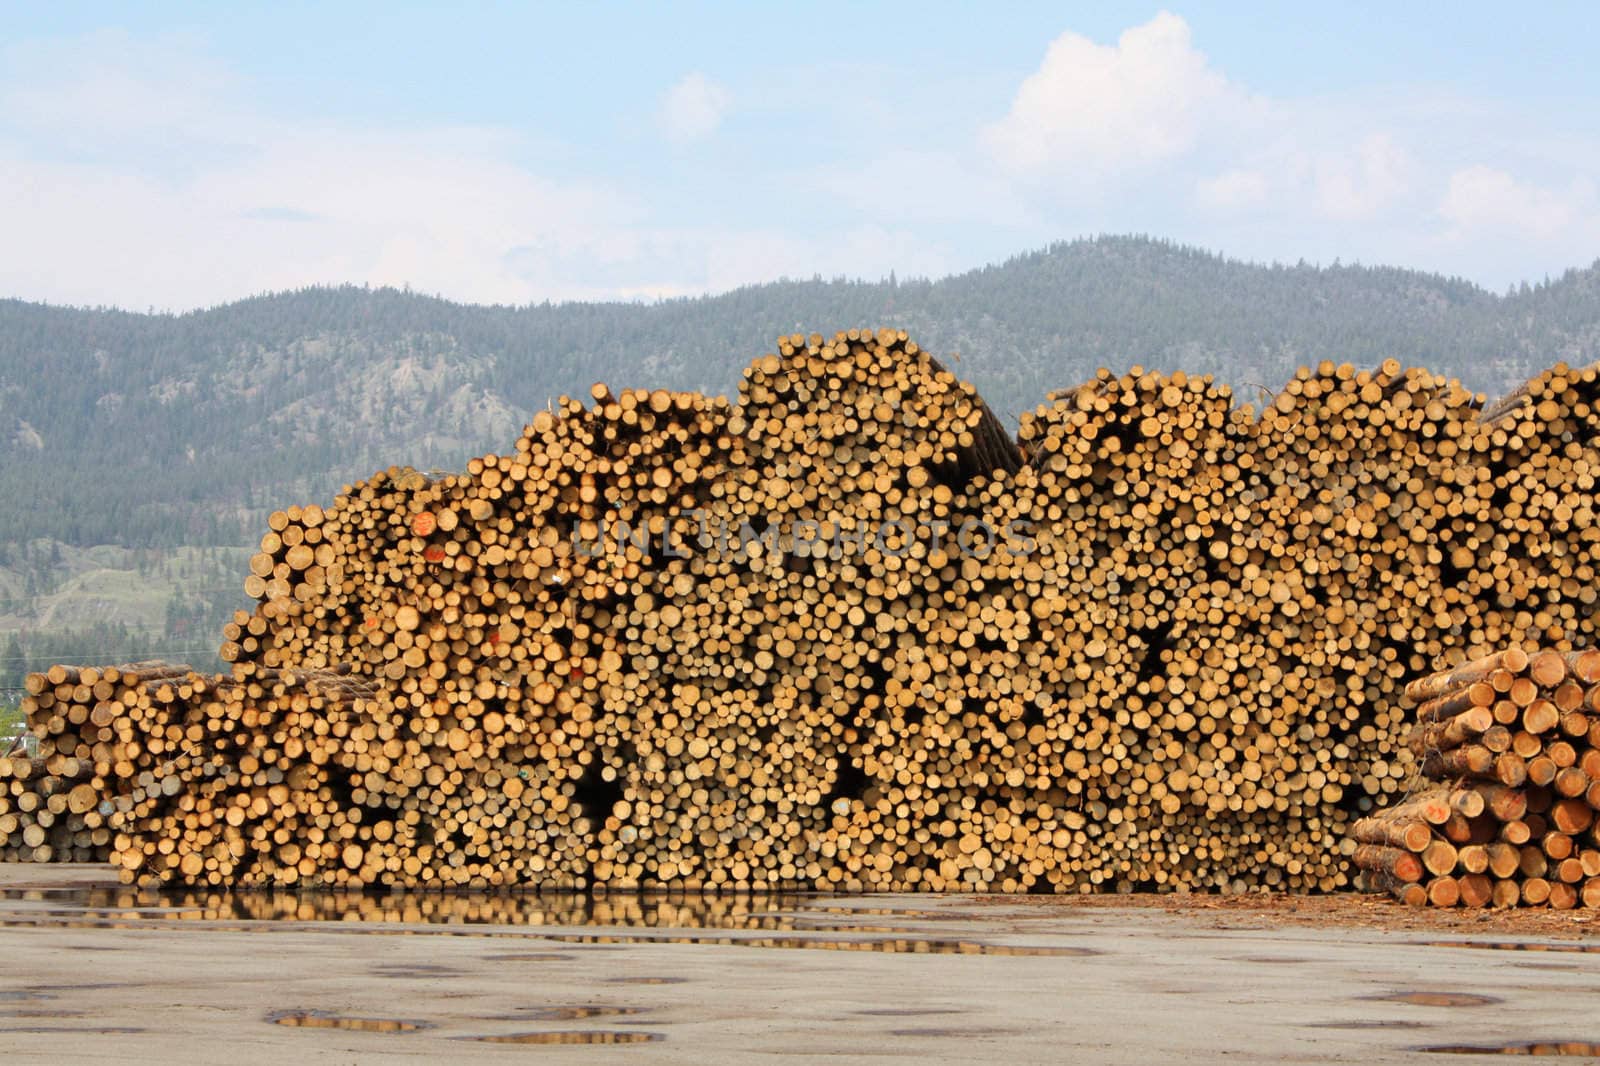 Piles of cut wood at timber mill